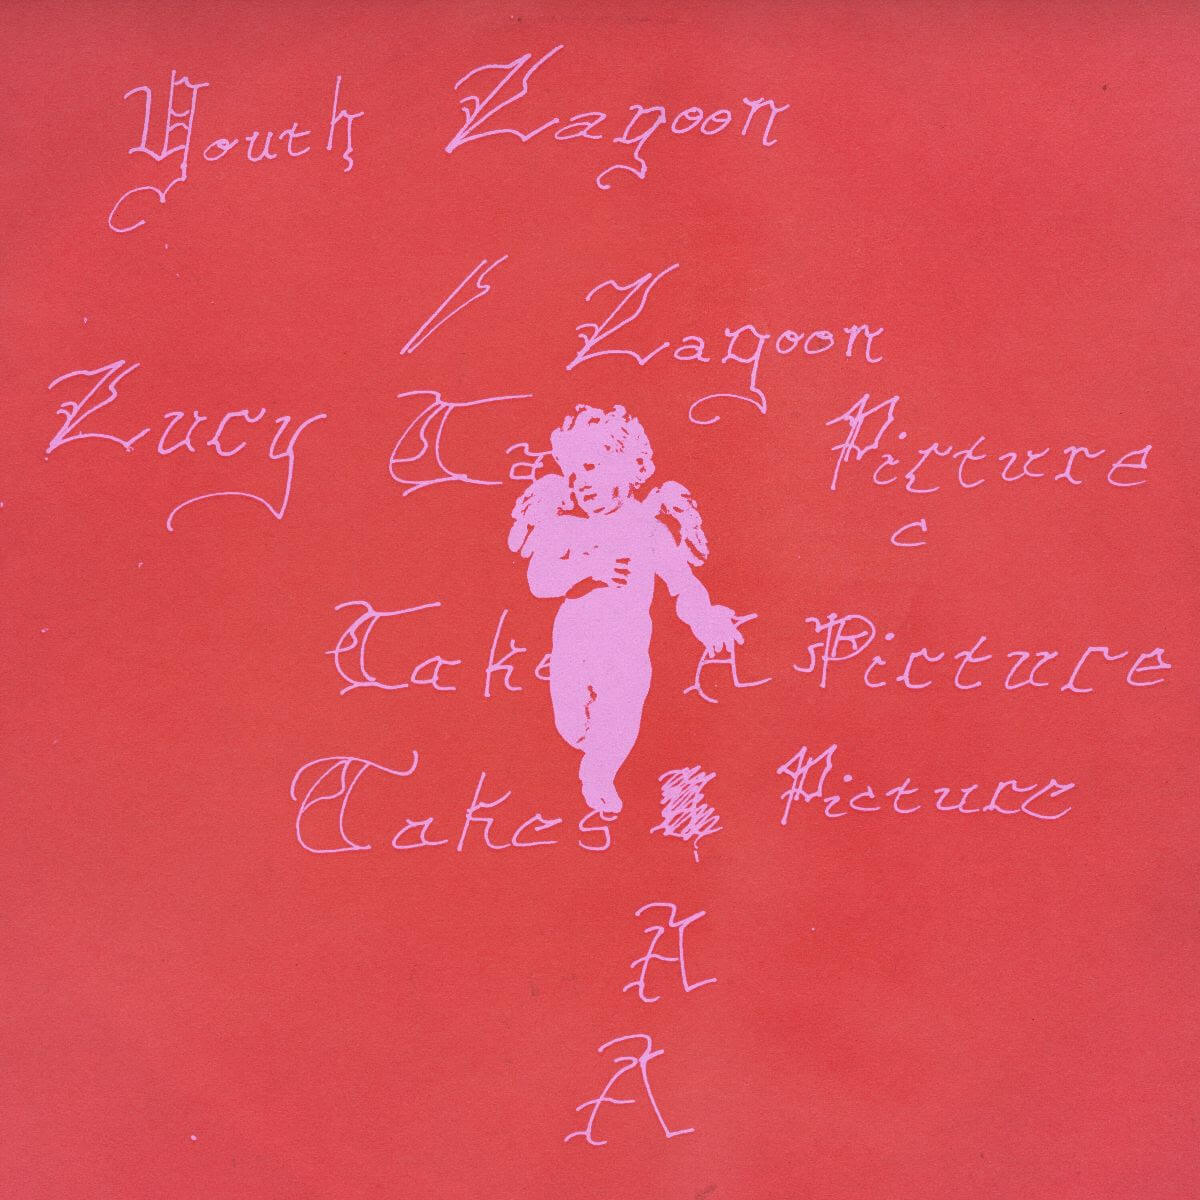 Youth Lagoon returns with a new single/video, “Lucy Takes a Picture.”